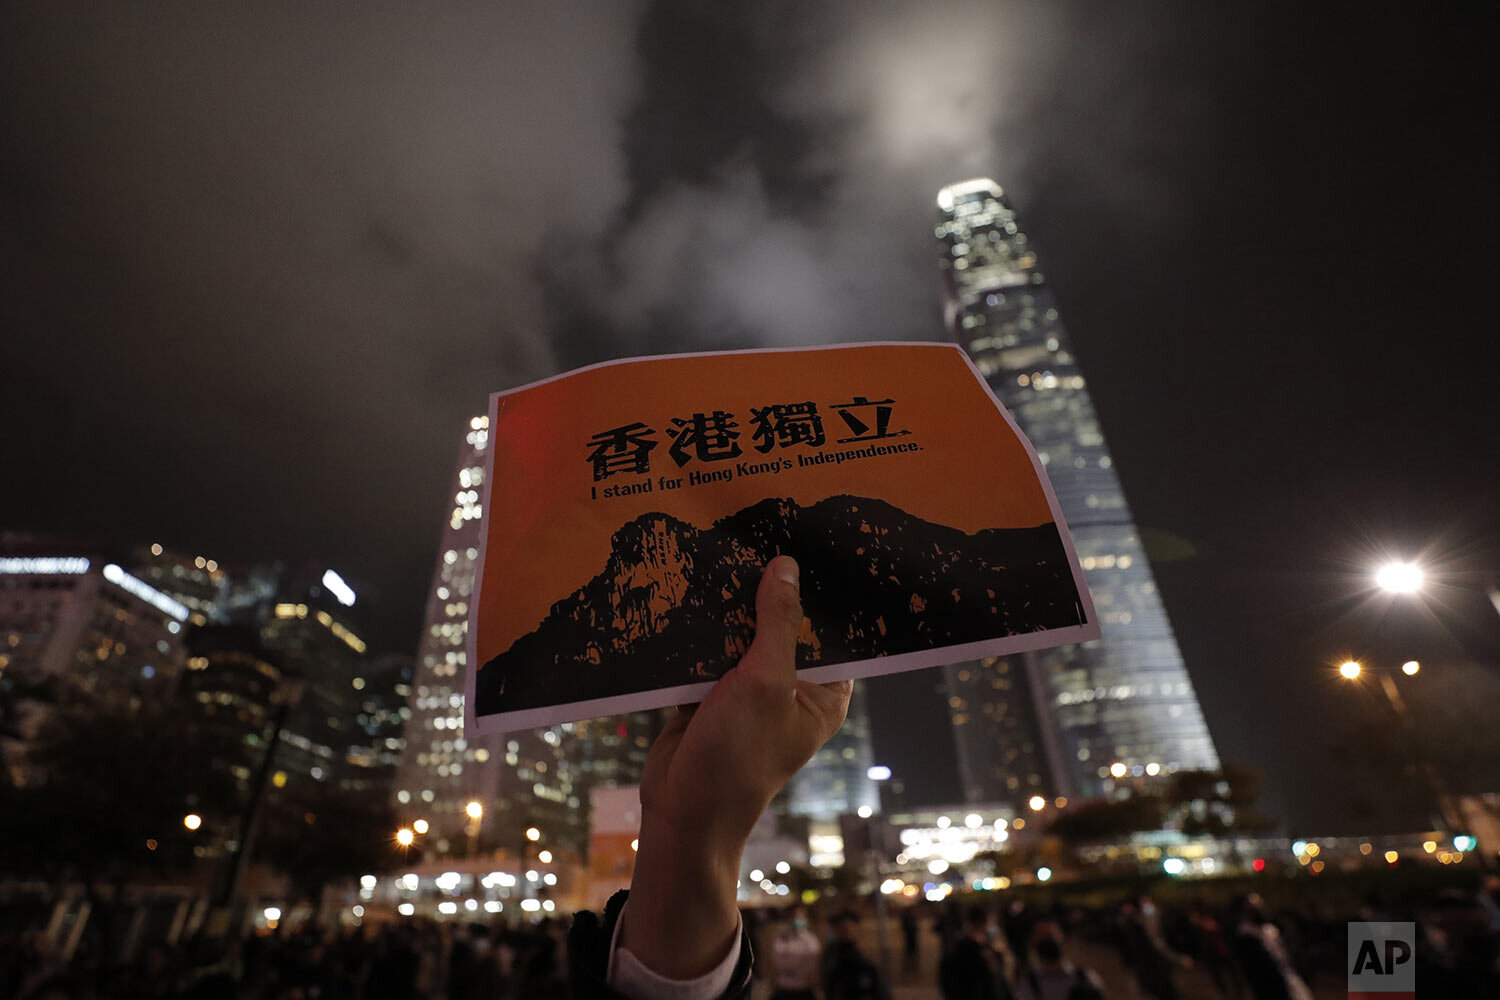  A man holds a sign reading "Hong Kong Independence" during a rally in Hong Kong, Monday, Dec. 23, 2019.  (AP Photo/Lee Jin-man) 